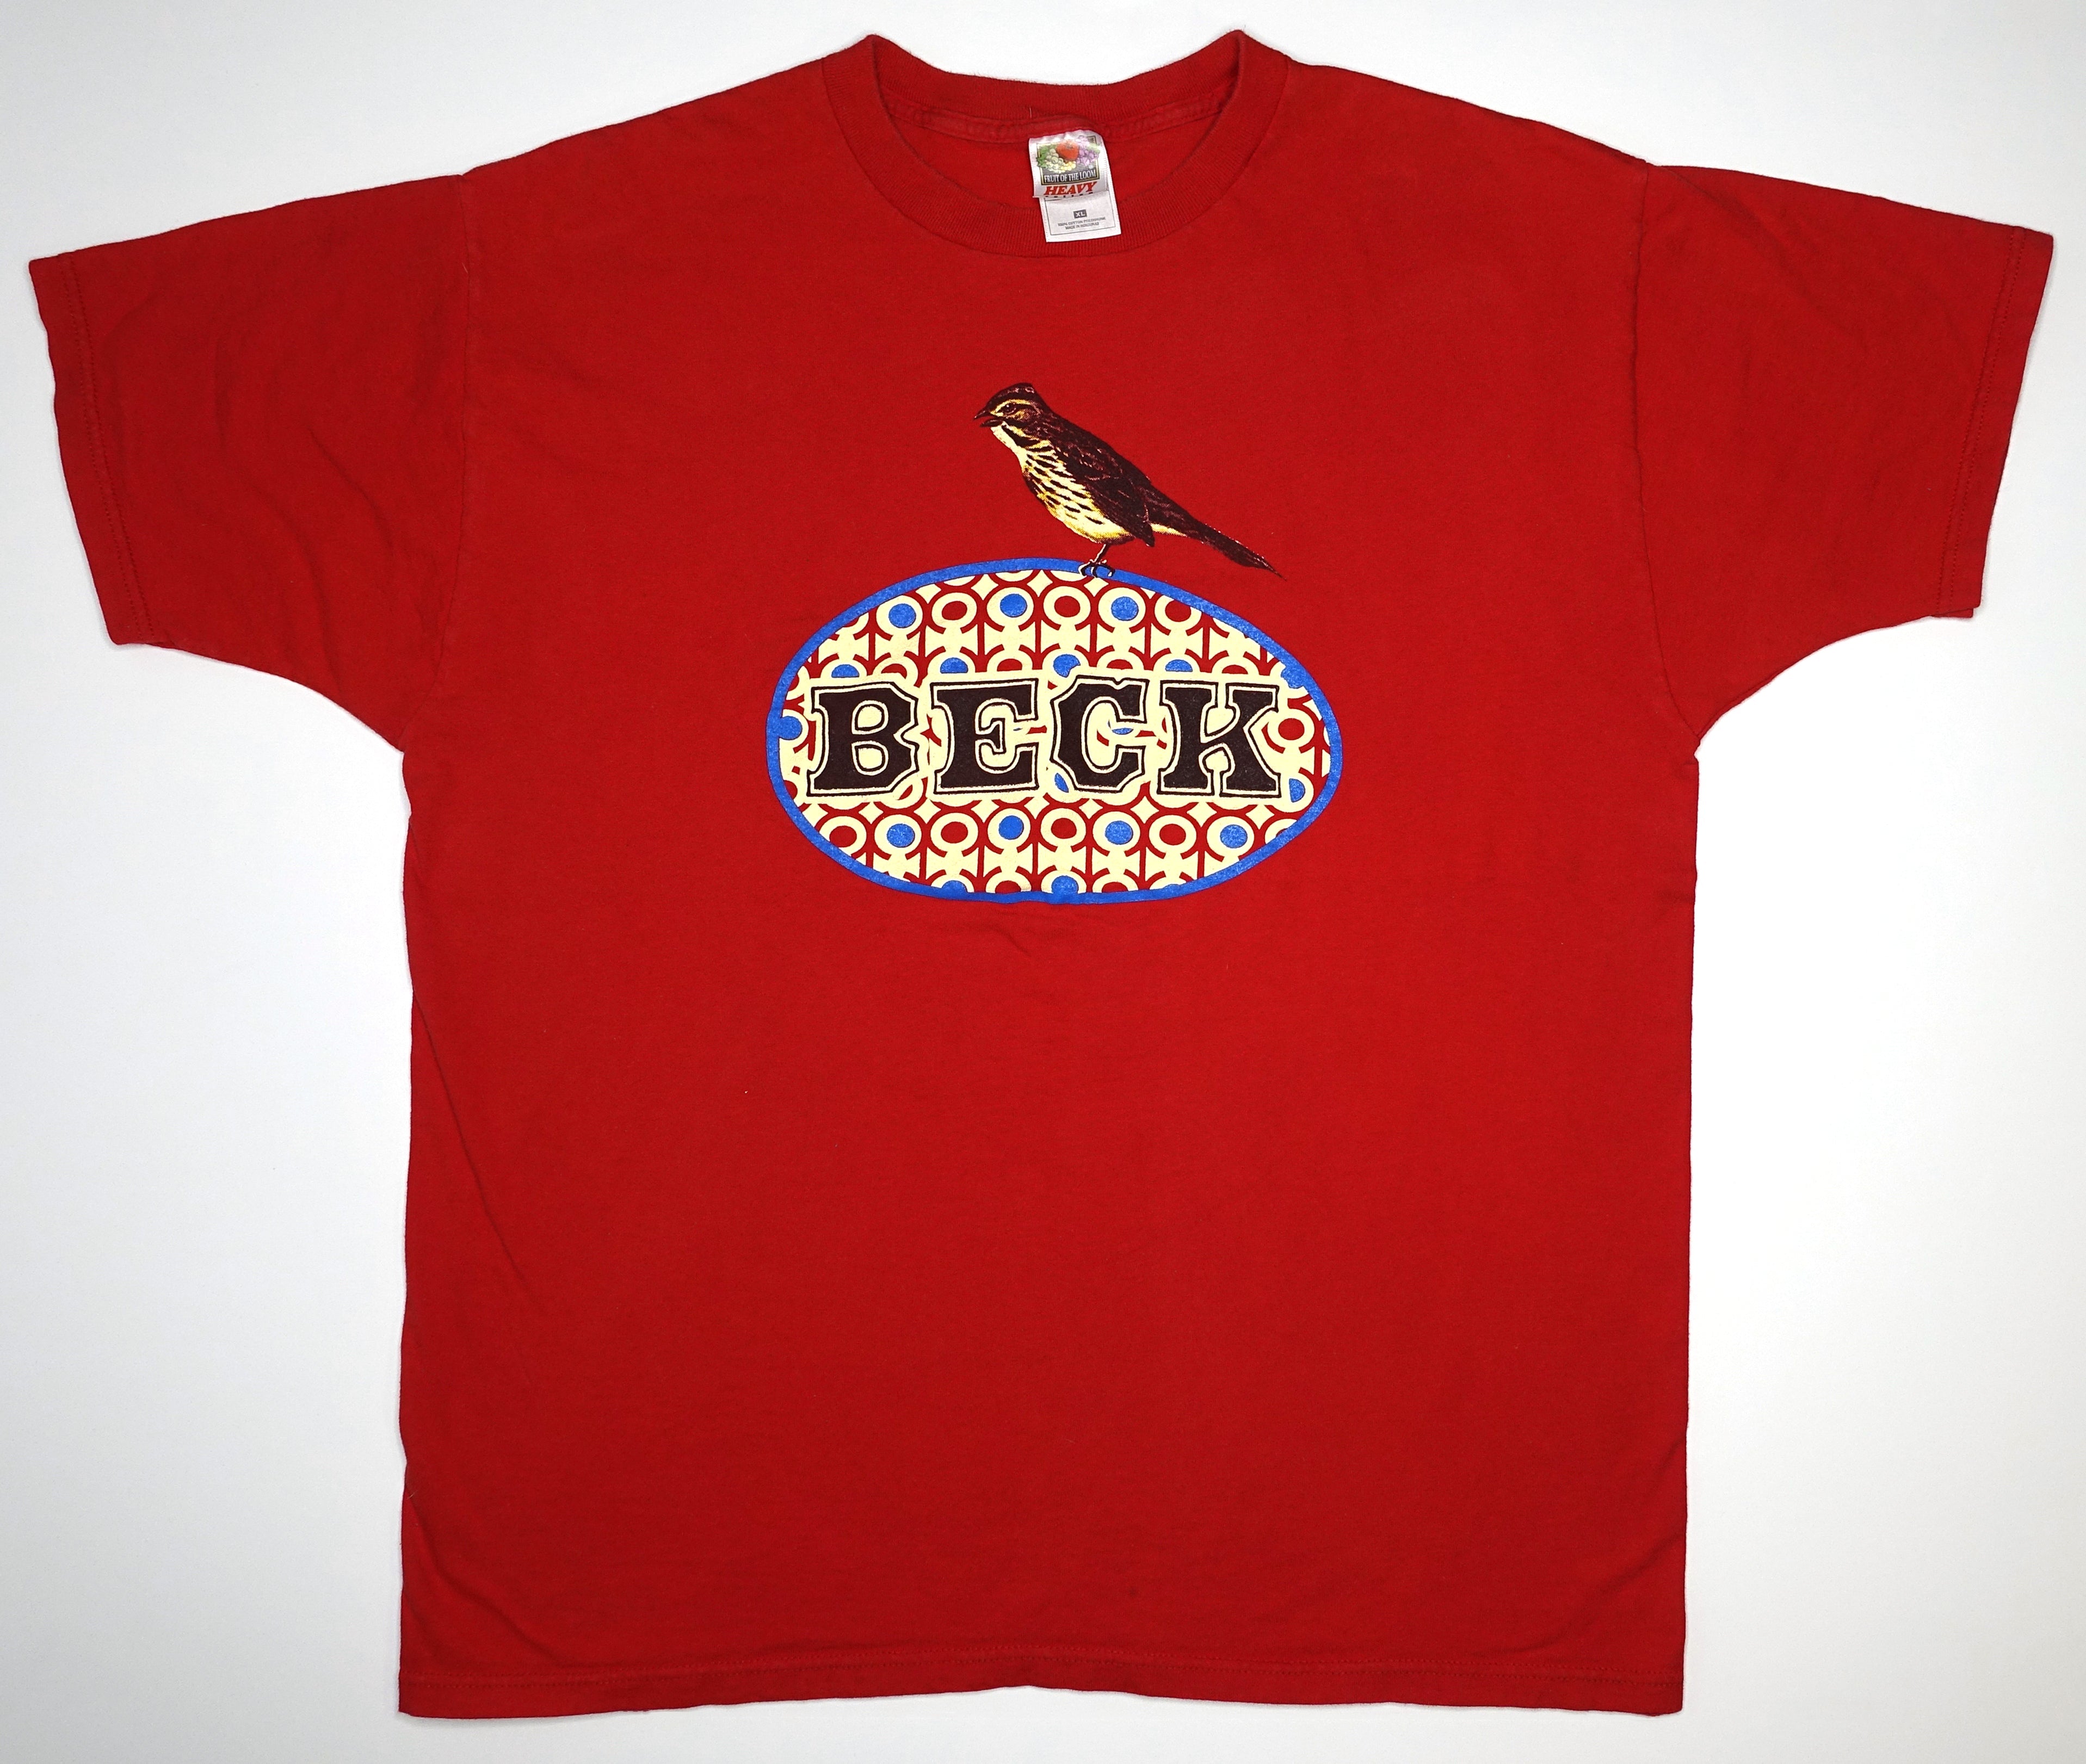 Beck ‎– Where It's At 90's (Red) Tour Shirt Size XL